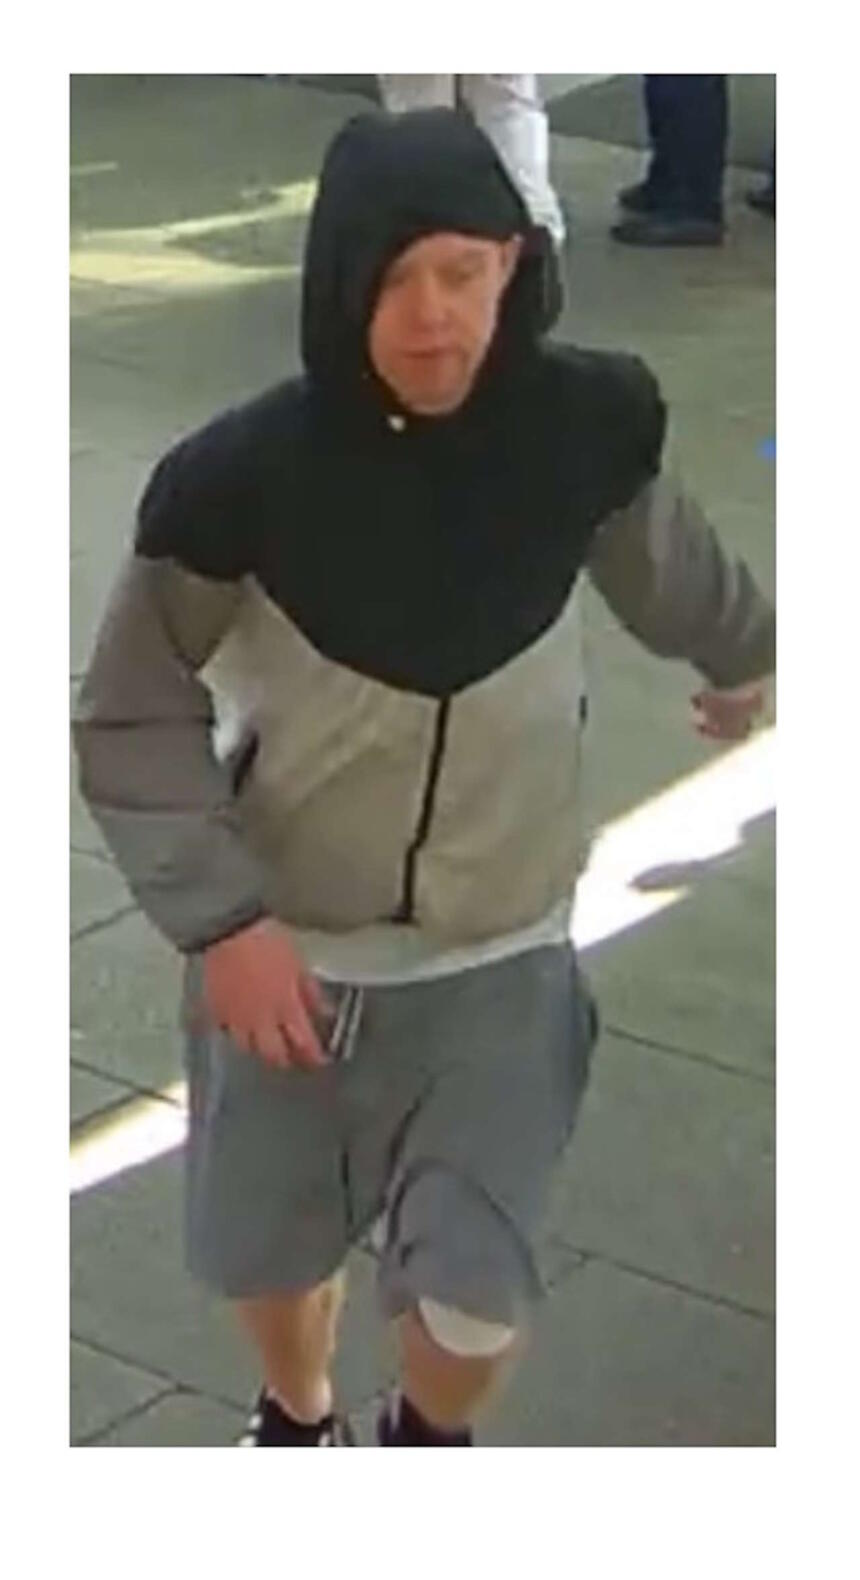 Image released following an assault at station - Birmingham